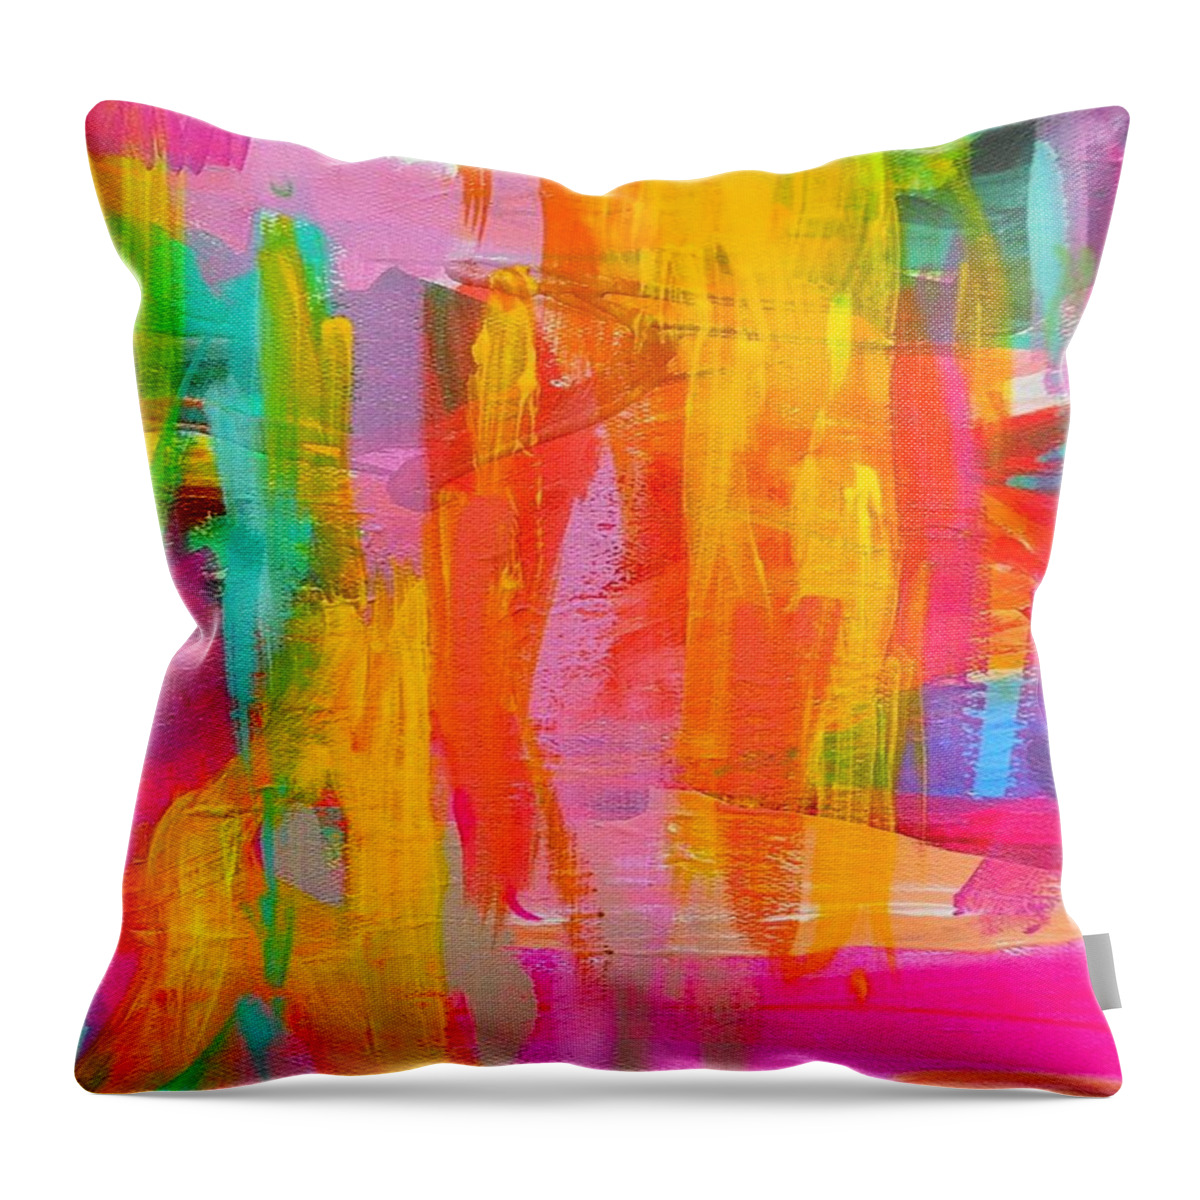 Picaso Throw Pillow featuring the drawing Paint Art by Vj Sr